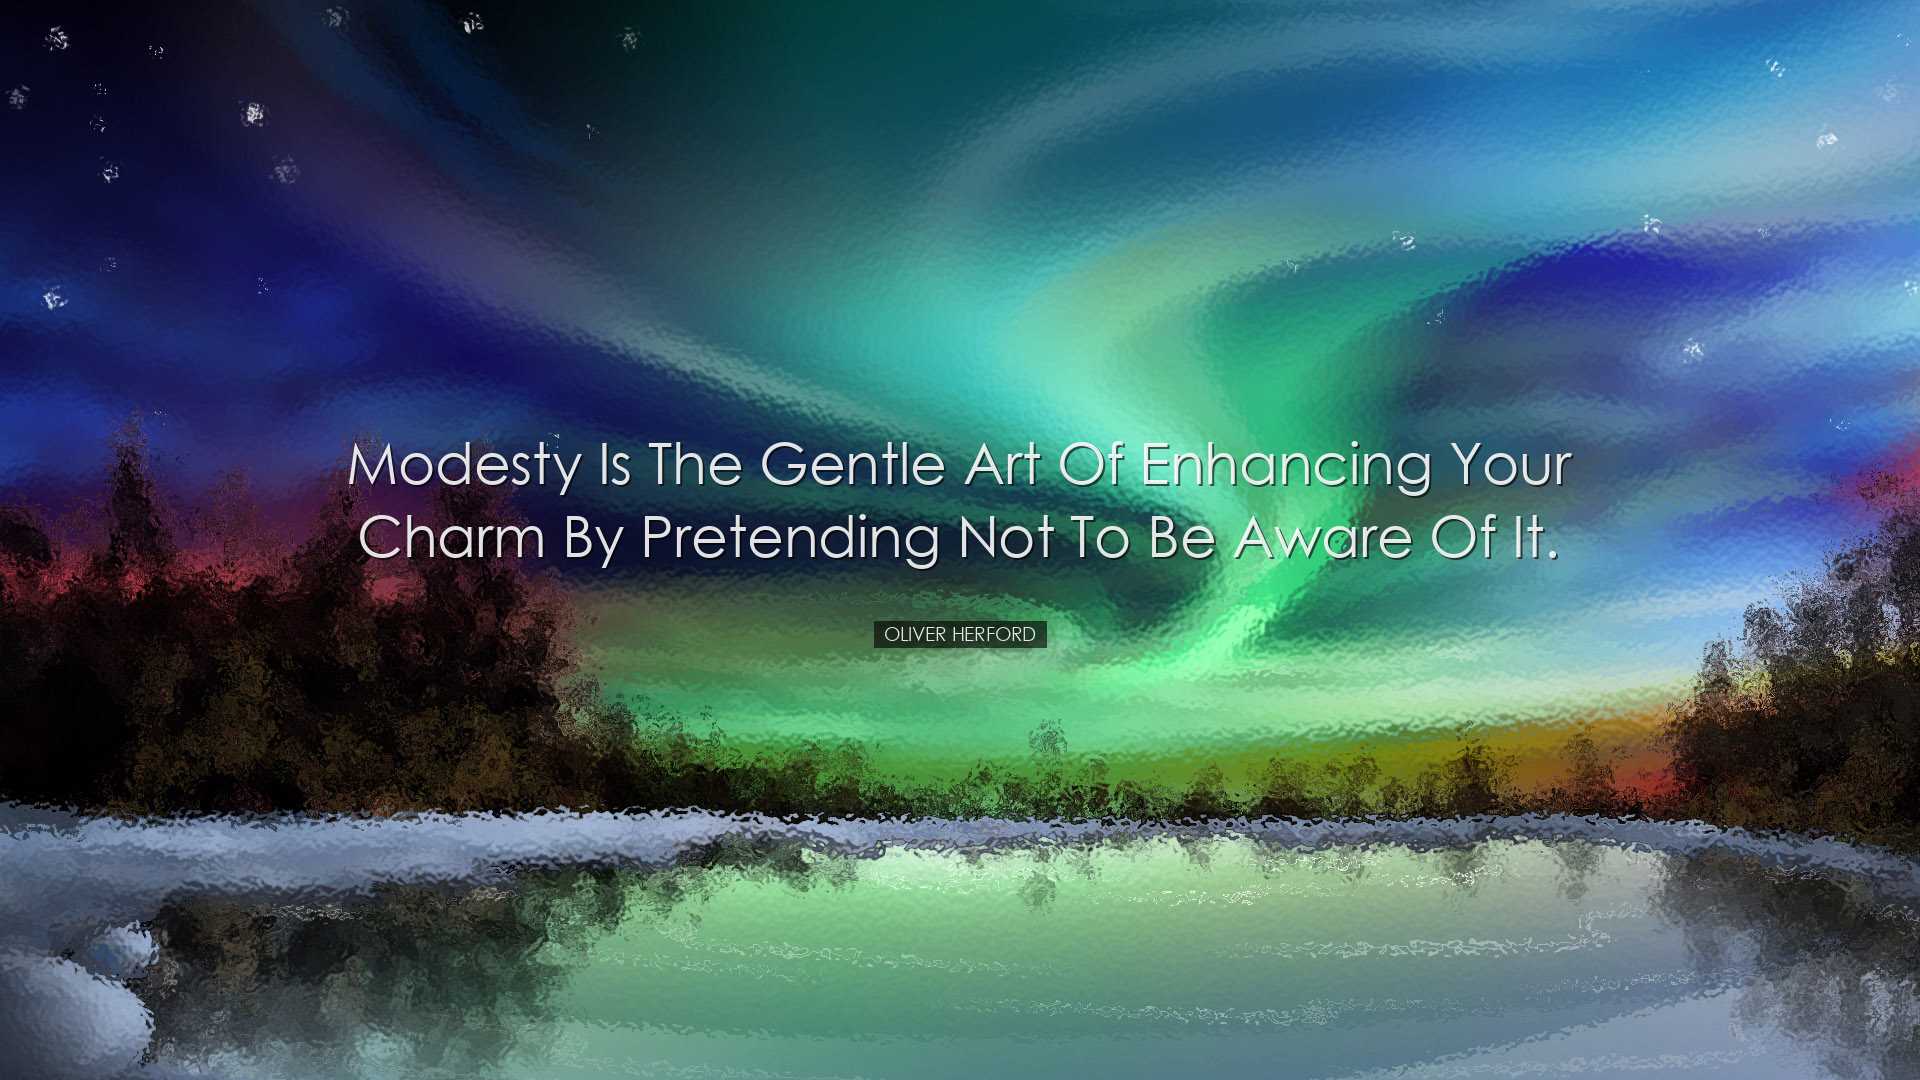 Modesty is the gentle art of enhancing your charm by pretending no